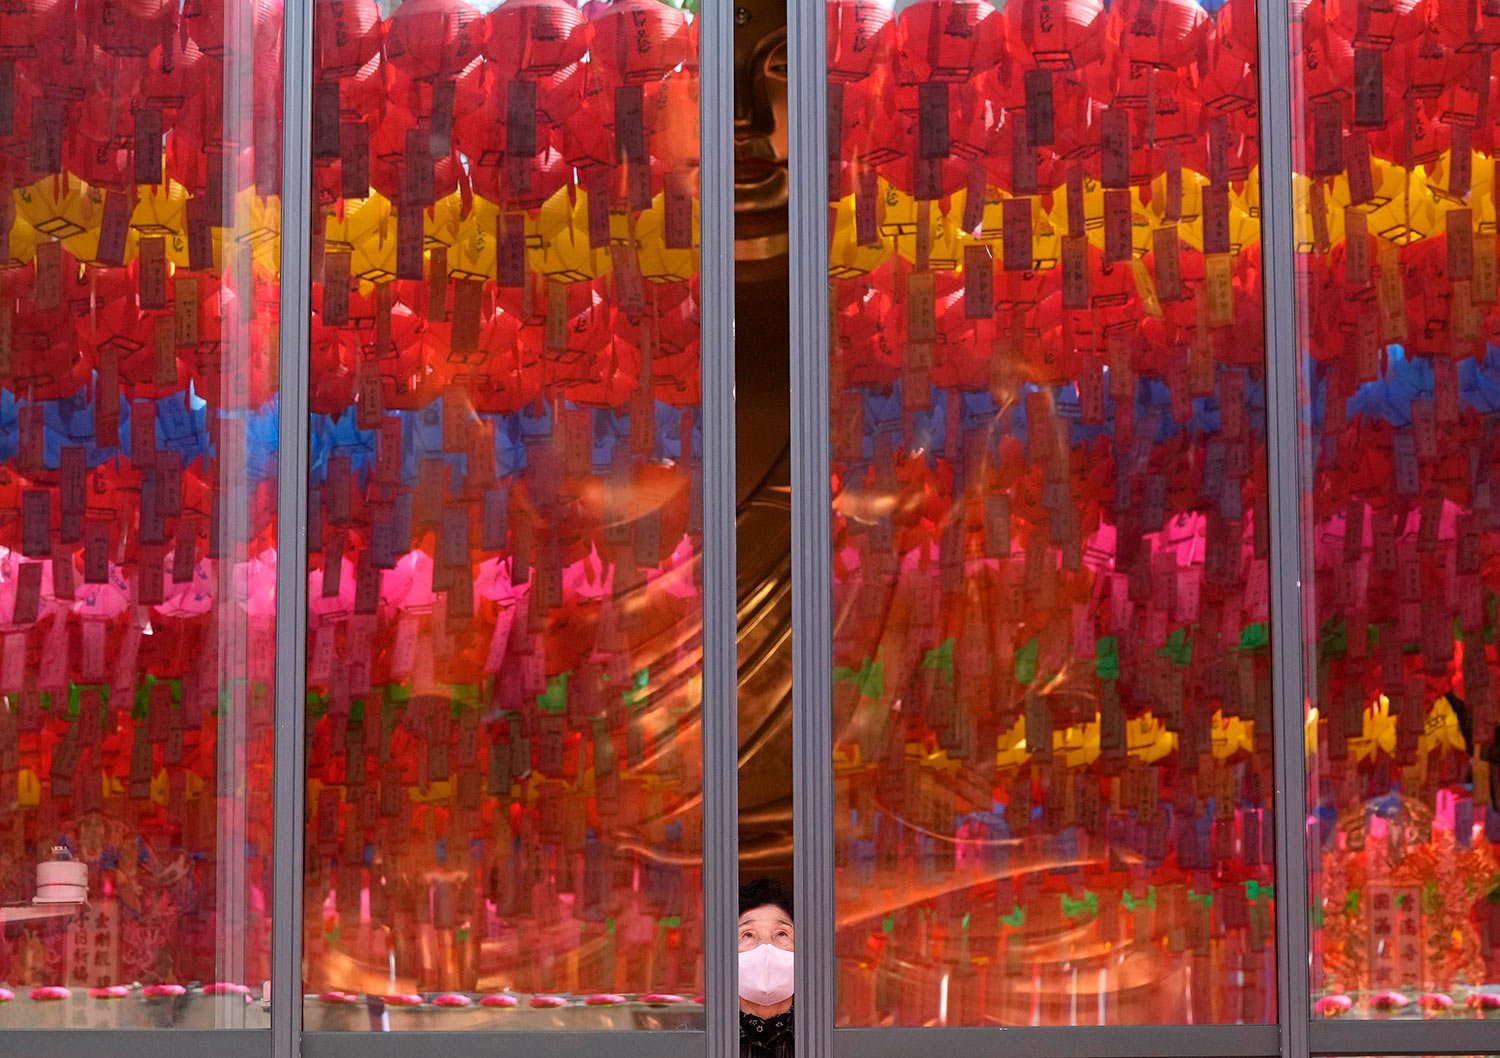  A woman wearing a face mask opens the window which reflects lanterns displayed for upcoming Buddha's birthday celebration slated for May 8, at Jogyesa temple in Seoul, South Korea, Wednesday, April 27, 2022. (AP Photo/Ahn Young-joon) 